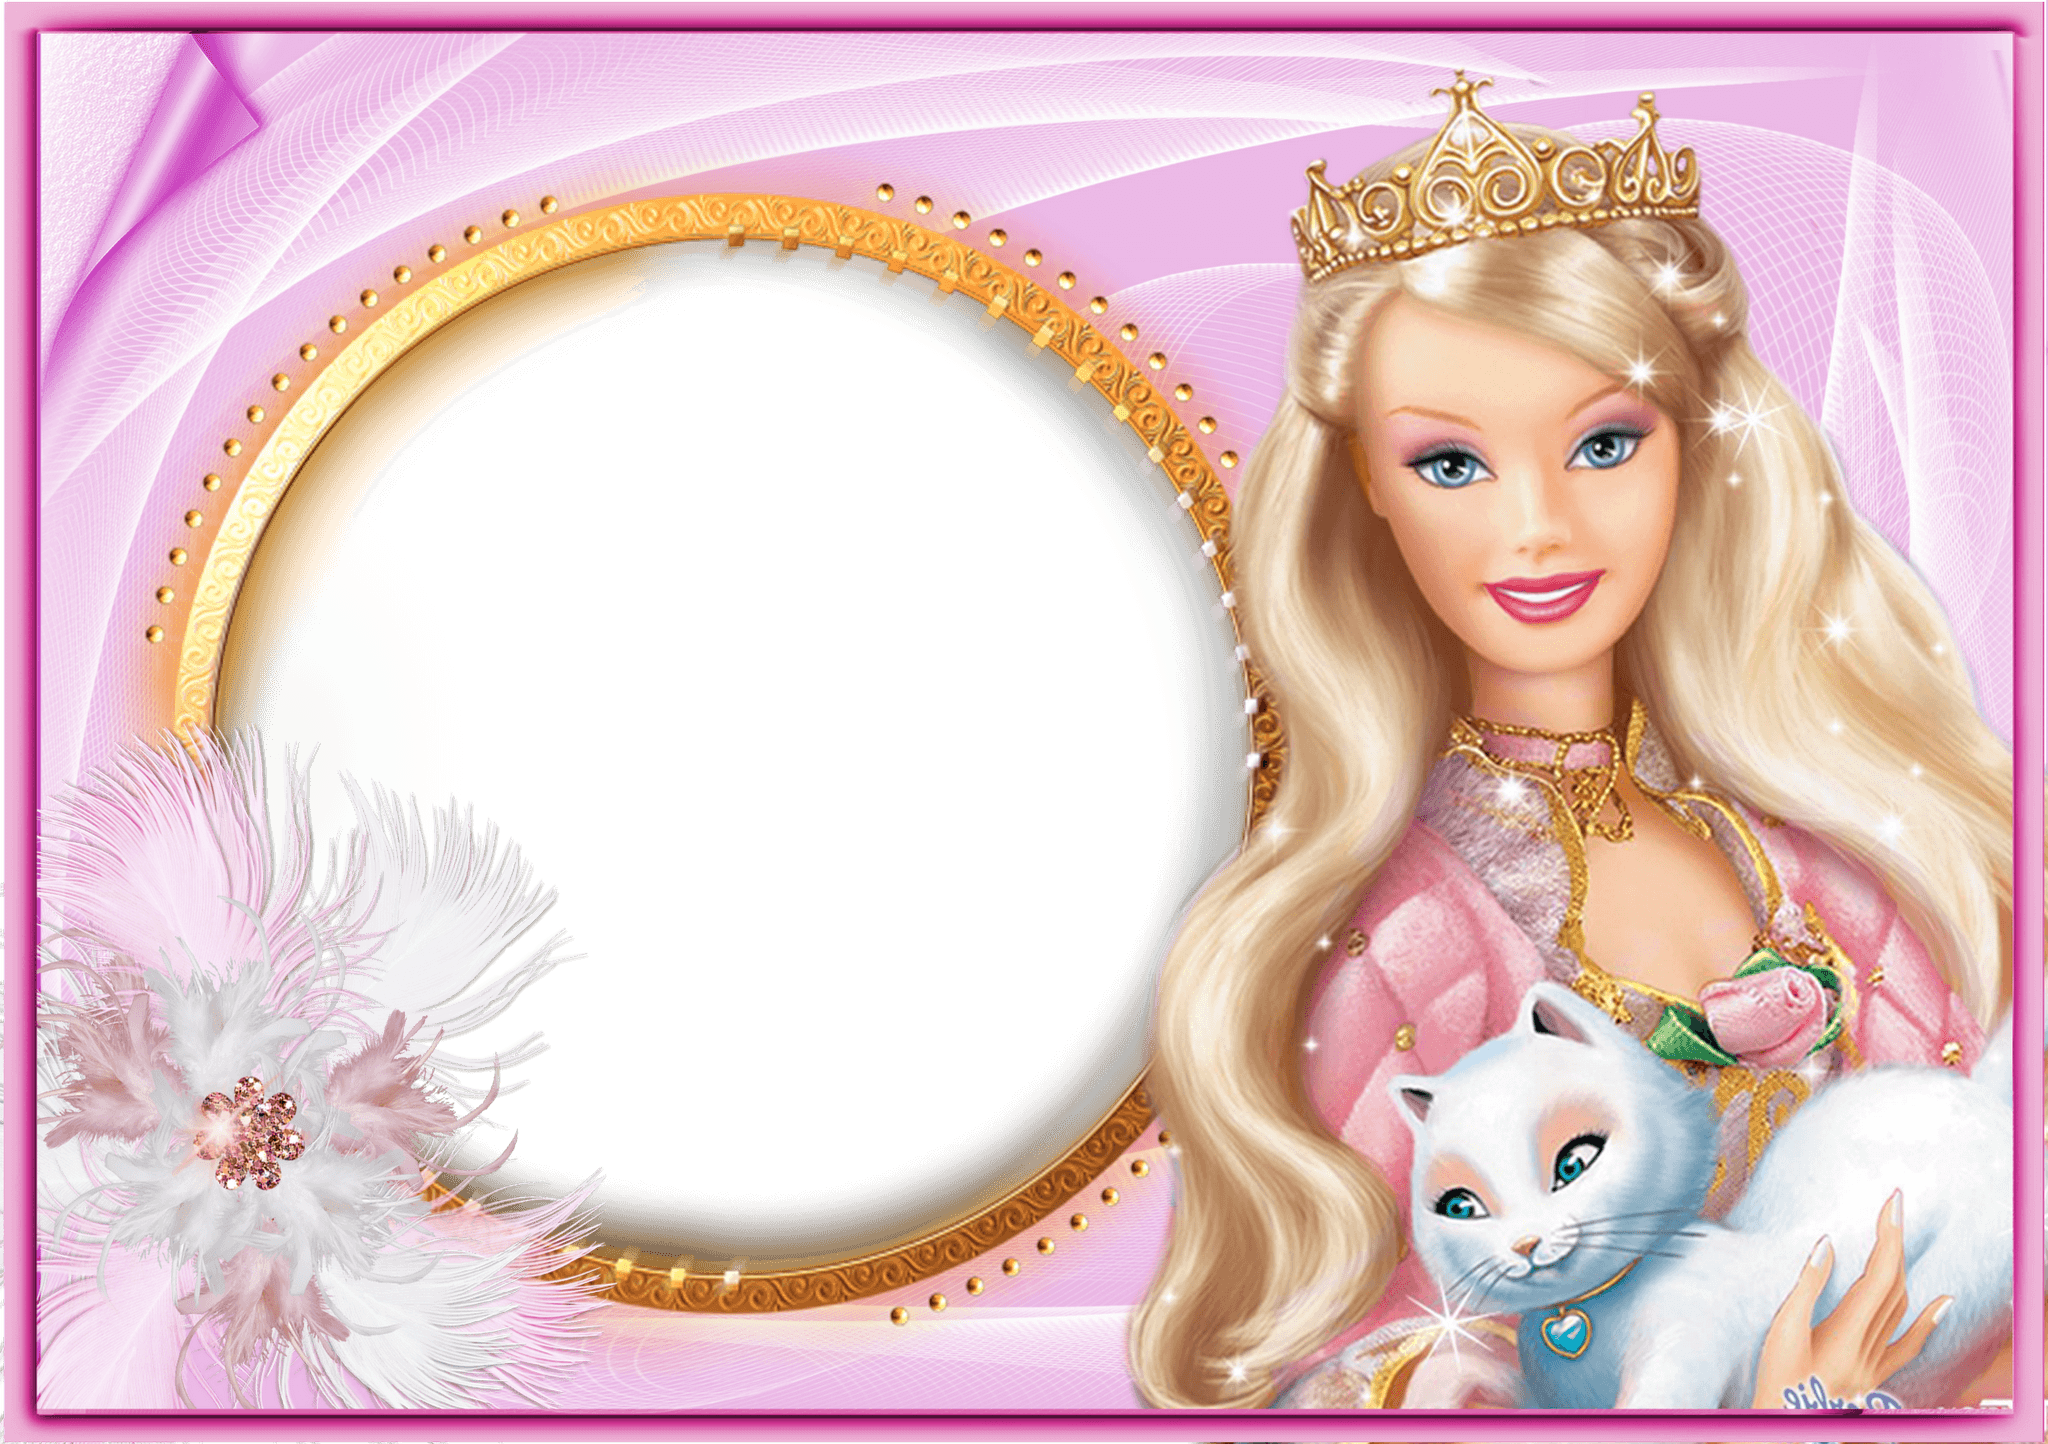 New Barbie Wallpapers 2016 - Wallpaper Cave